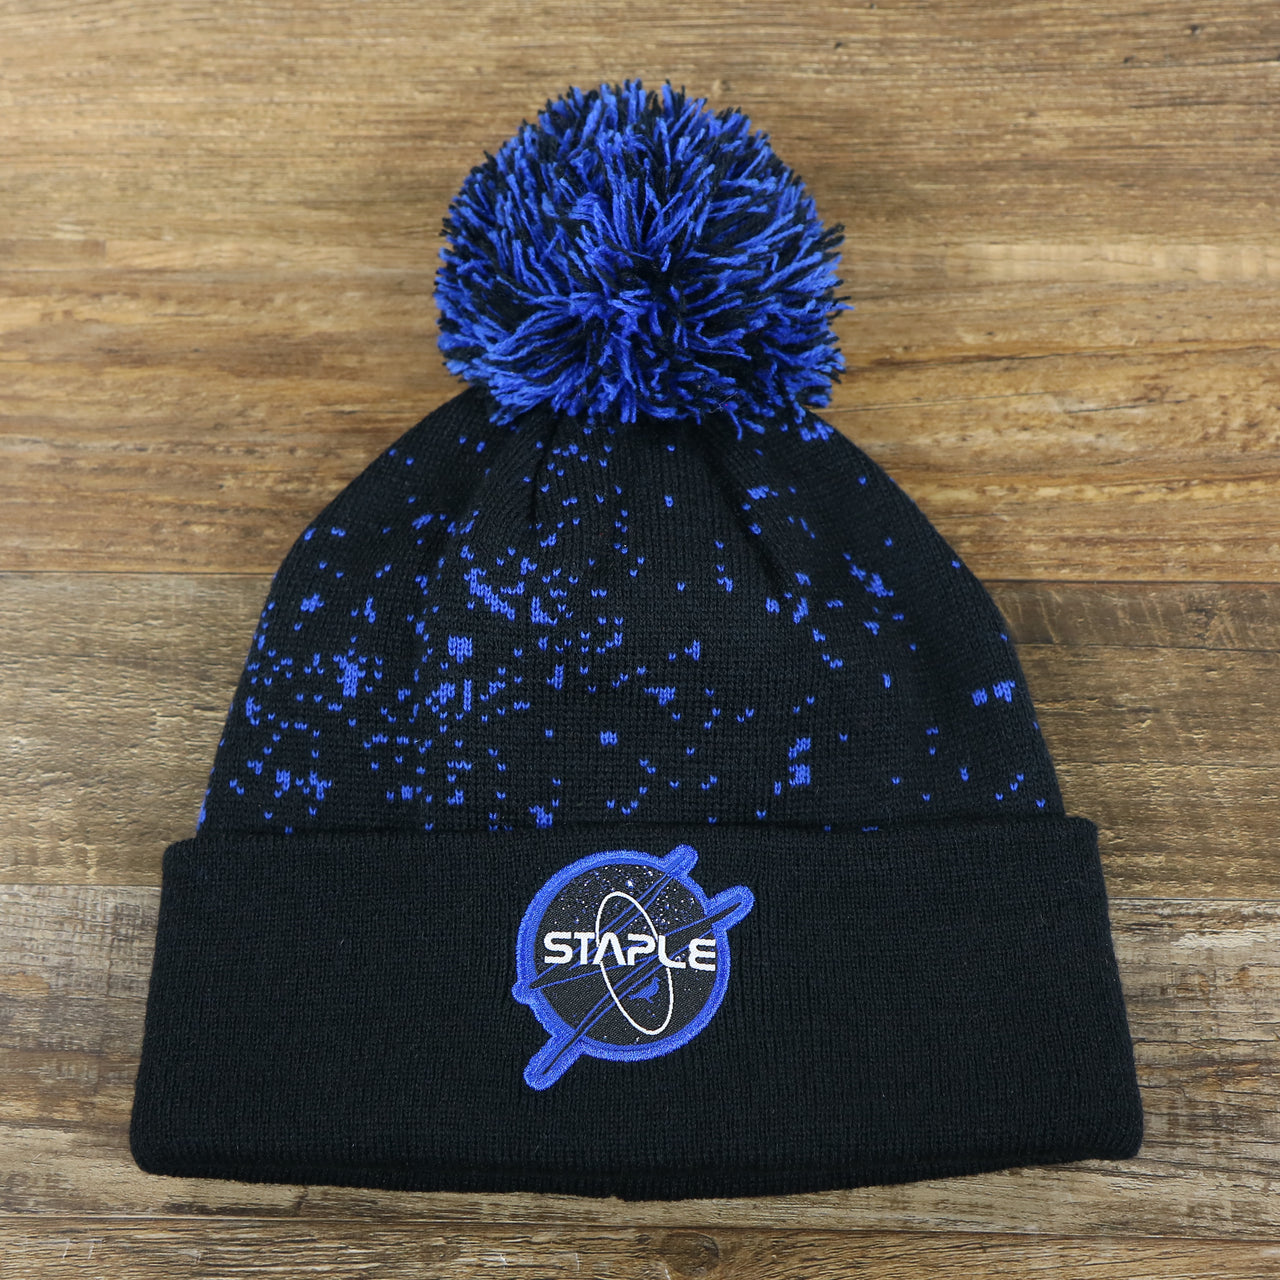 The front of the Staple Space Logo Space Print Cuffed Pom Pom Winter Beanie | Black And Royal Blue Beanie